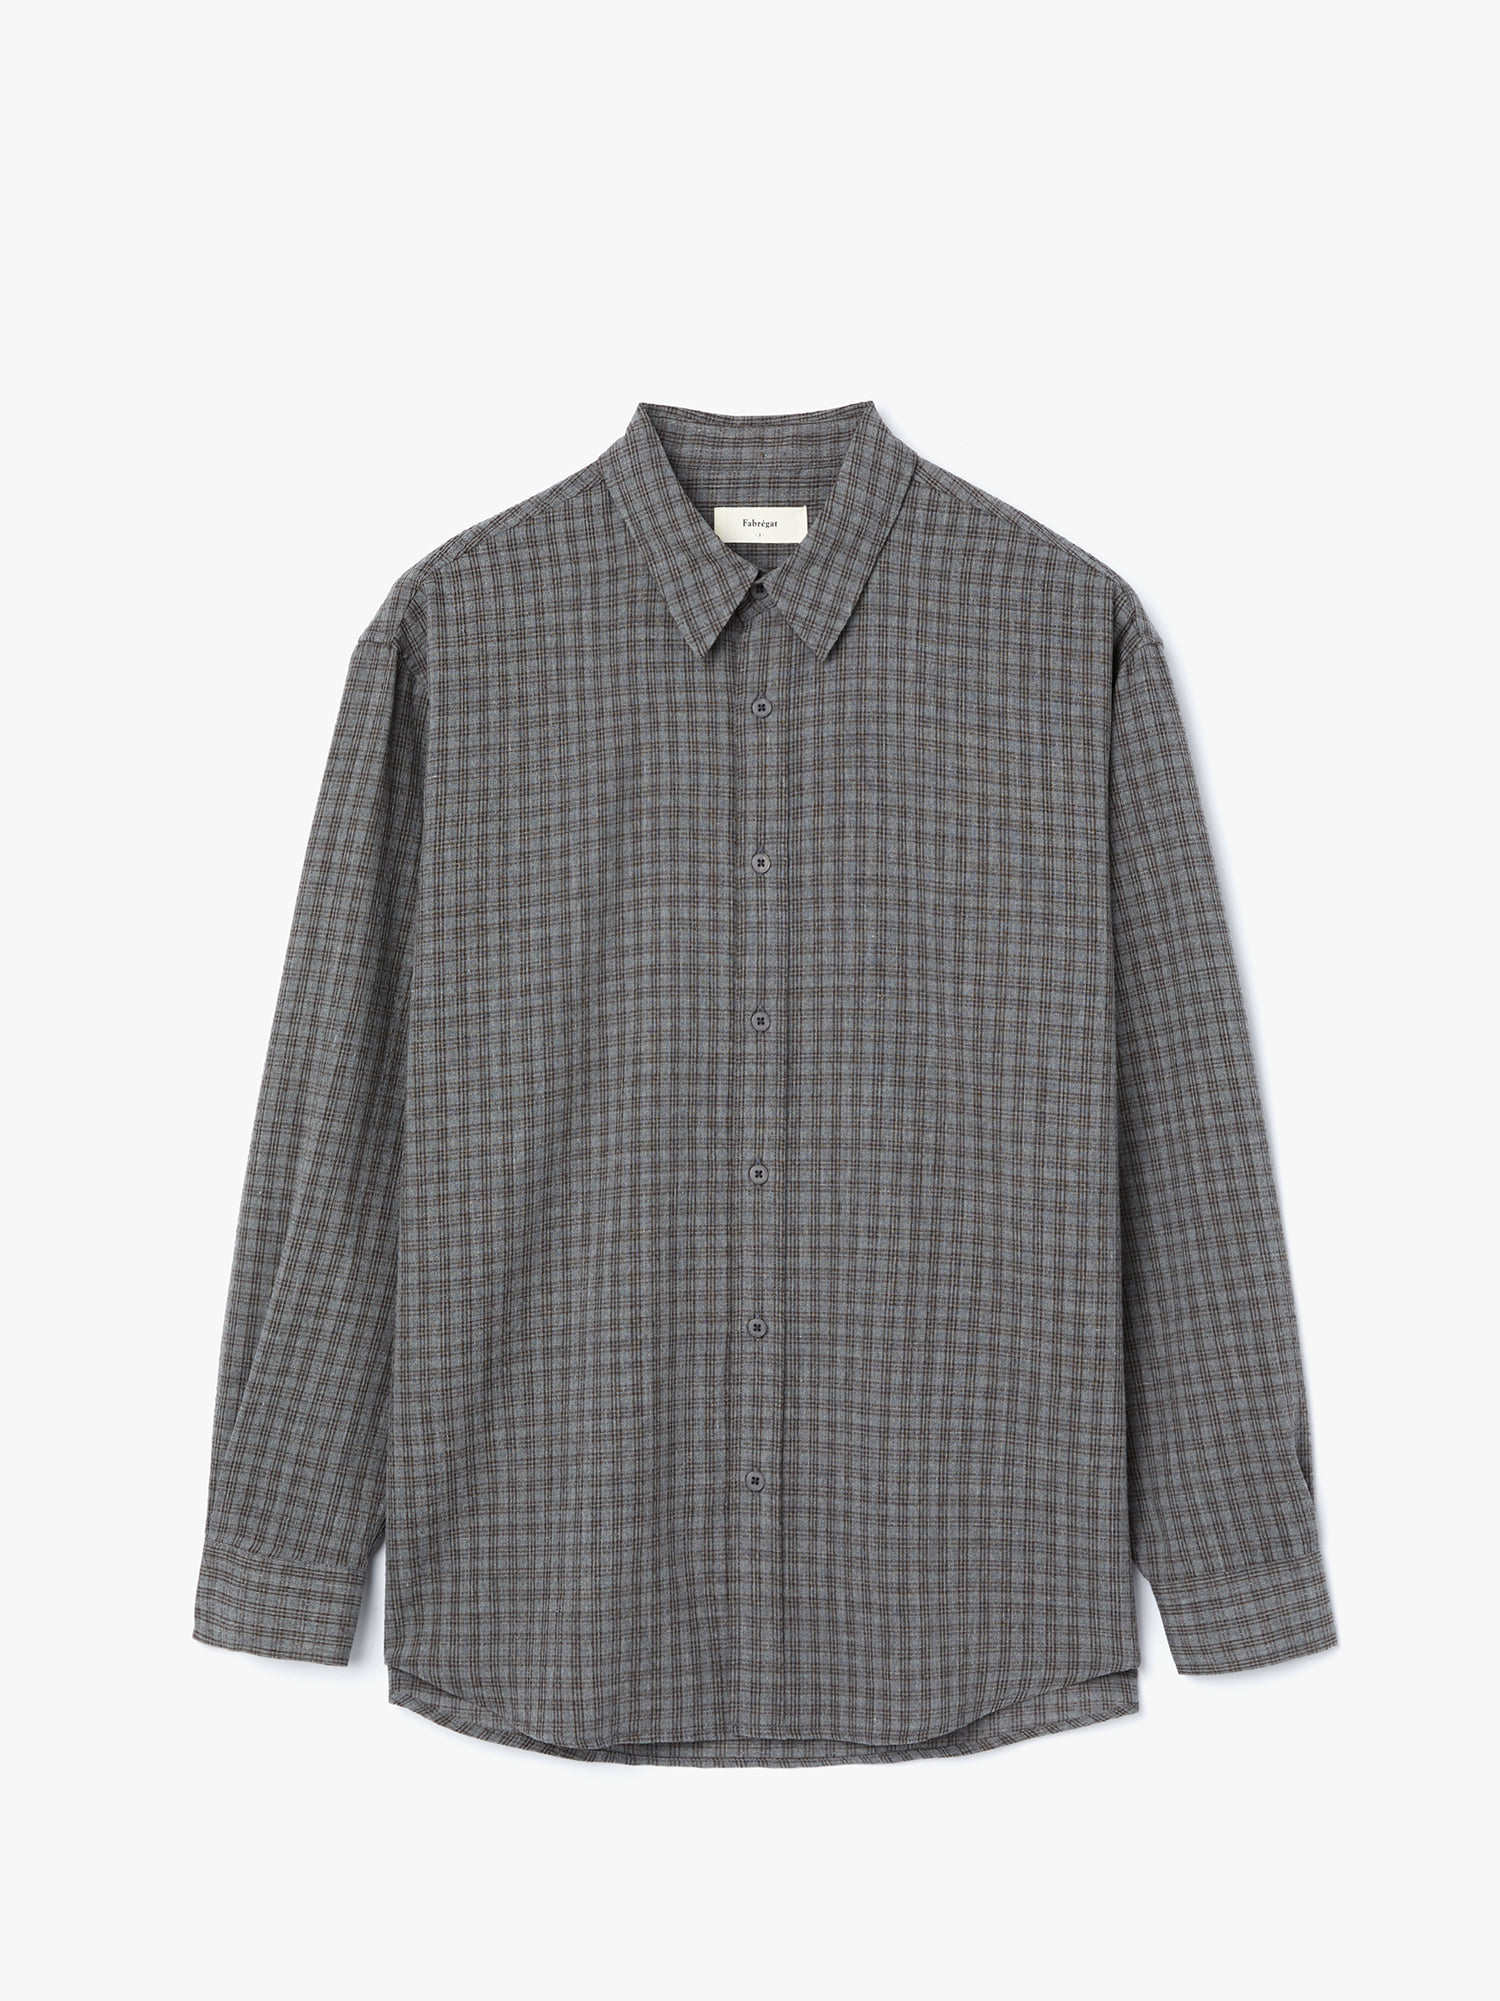 Louis Over Check Shirts (Mint gray)